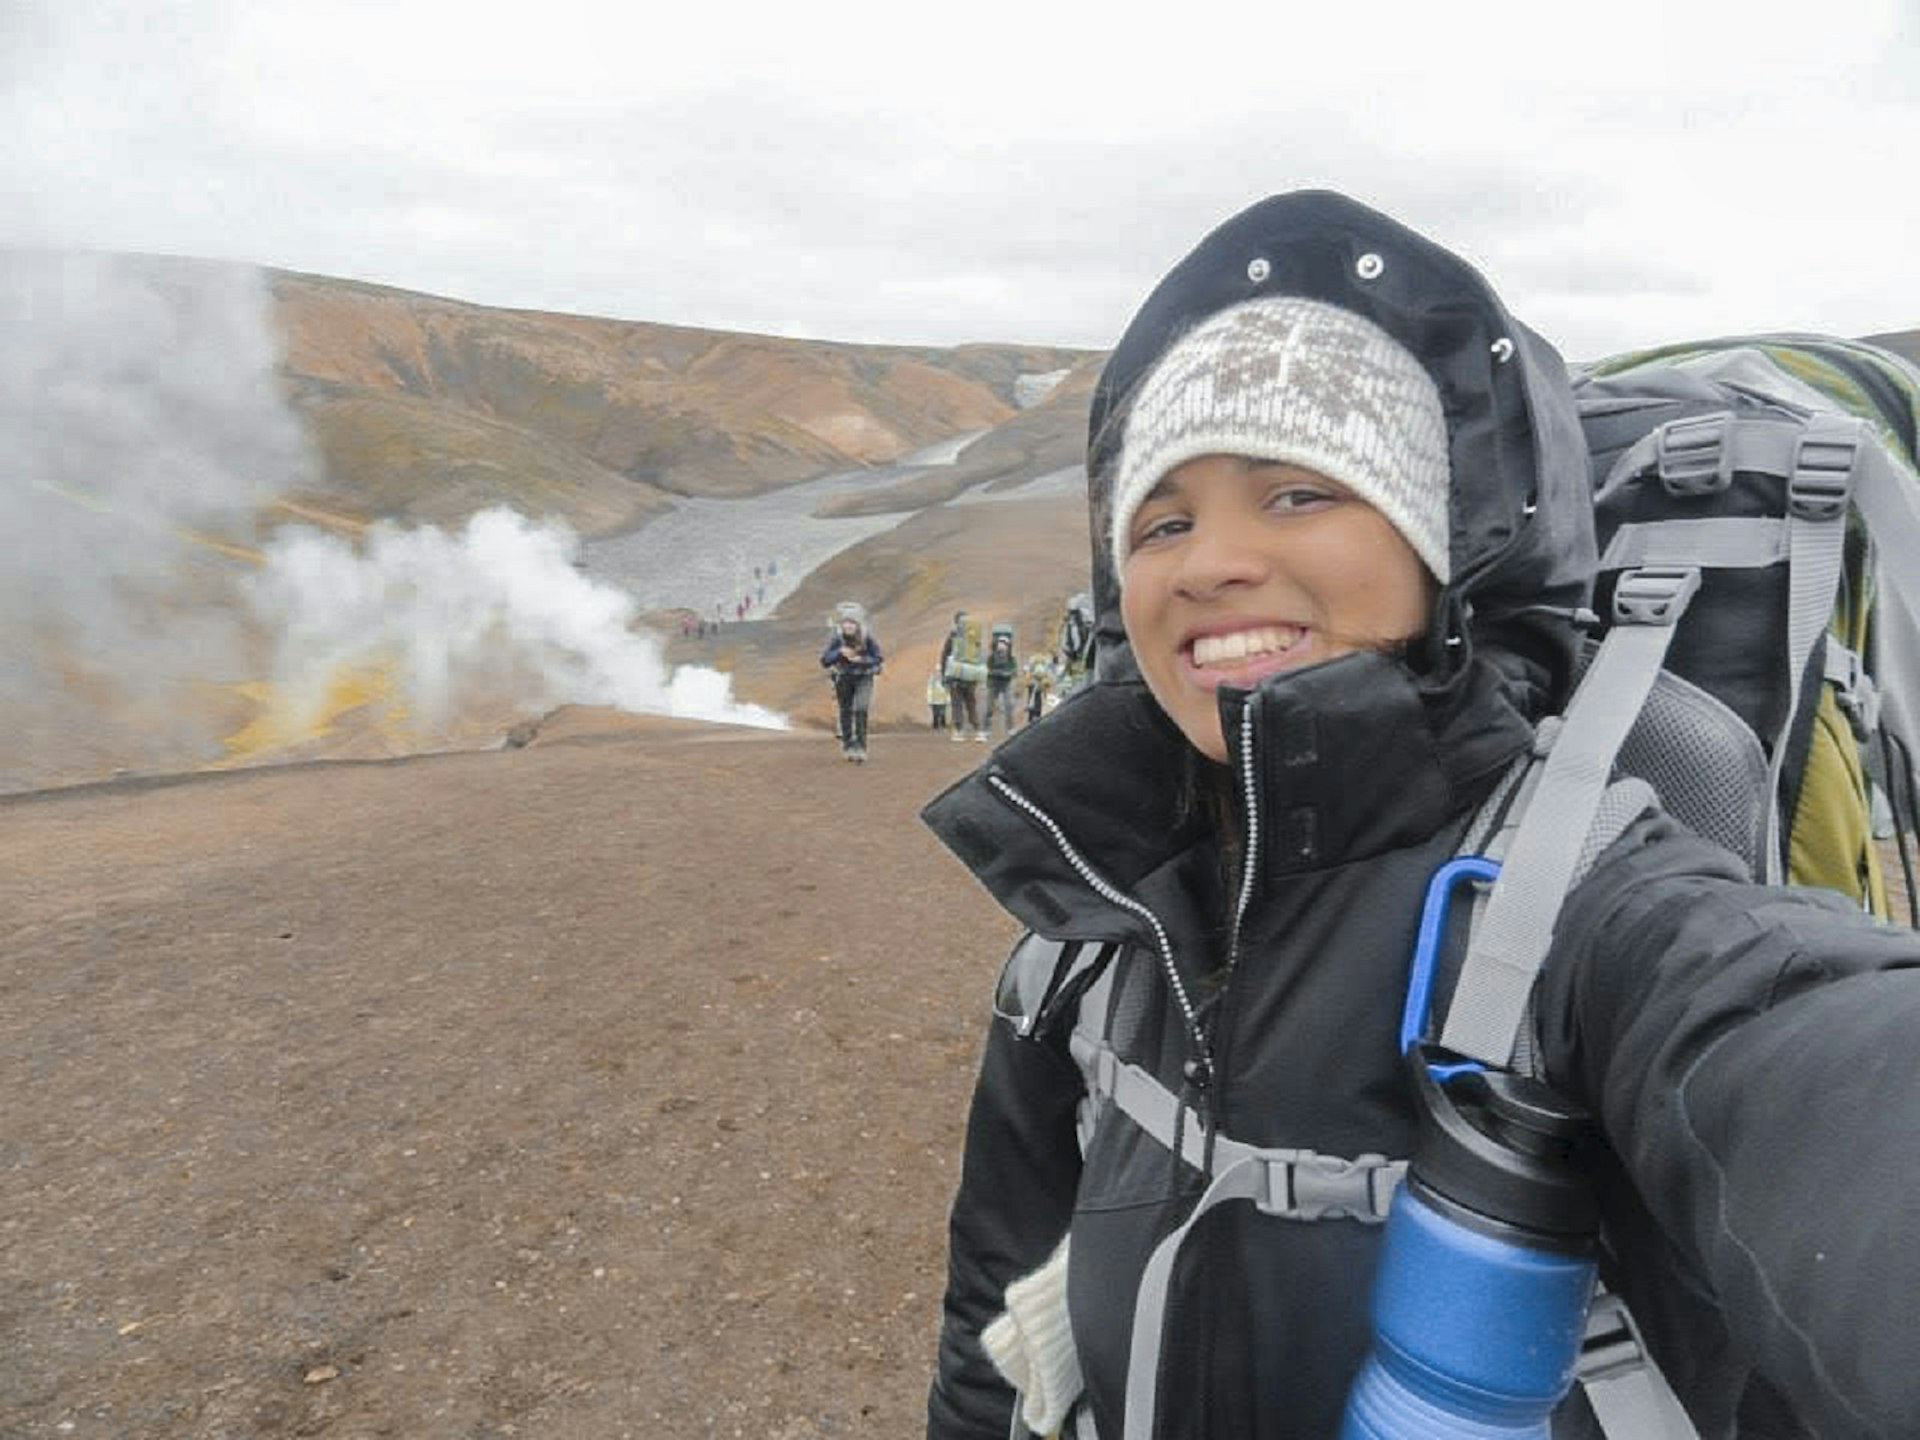 Backpacker Gabby takes a selfie on her first day of the trip backpacking the Landmannalaugar trail in Iceland in 2013